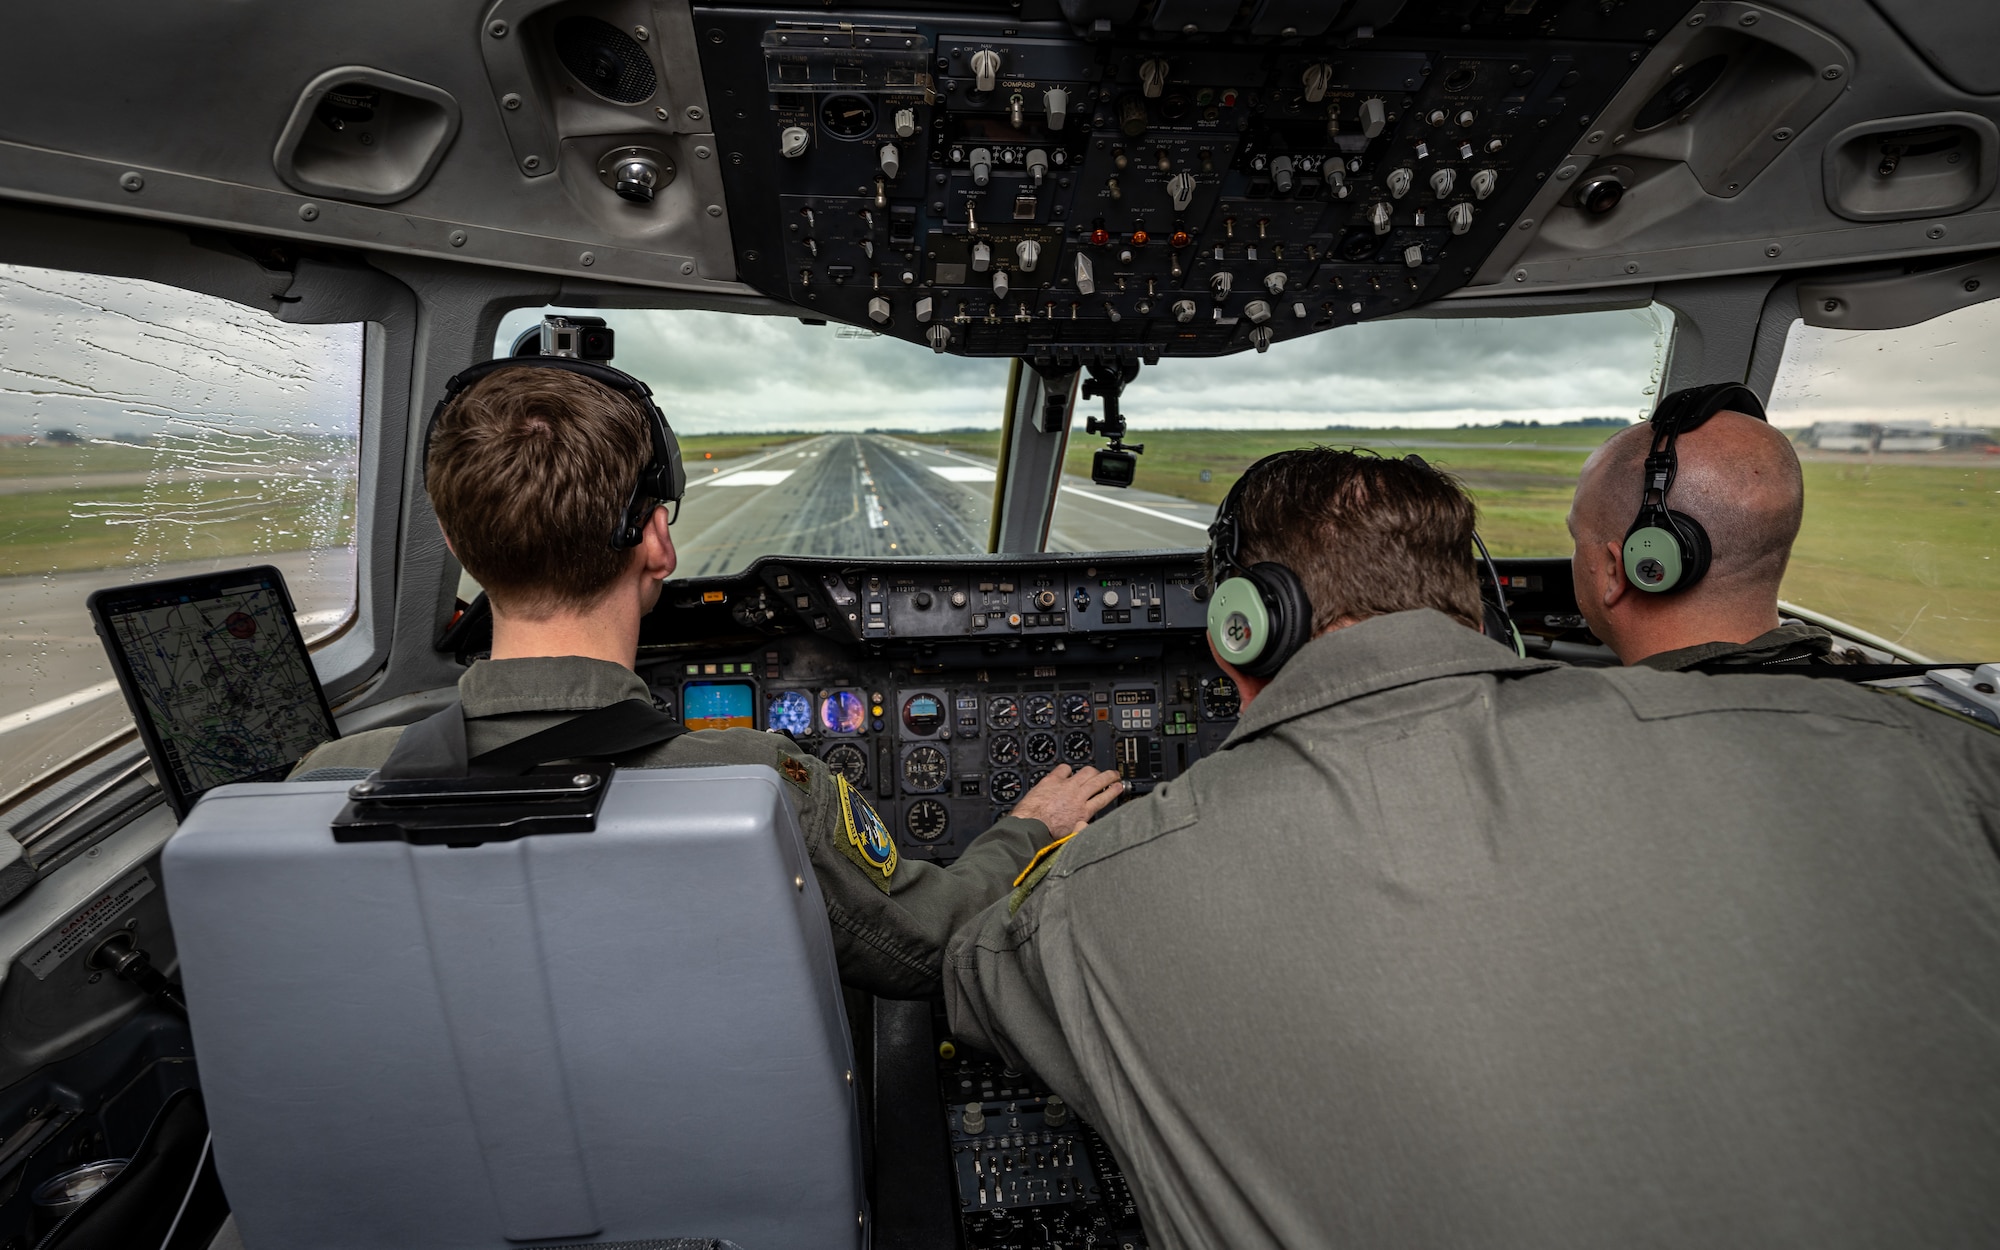 Over the shoulder view of 2 pilots and flight engineer looking through cockpit window while taking off with a runway in the background